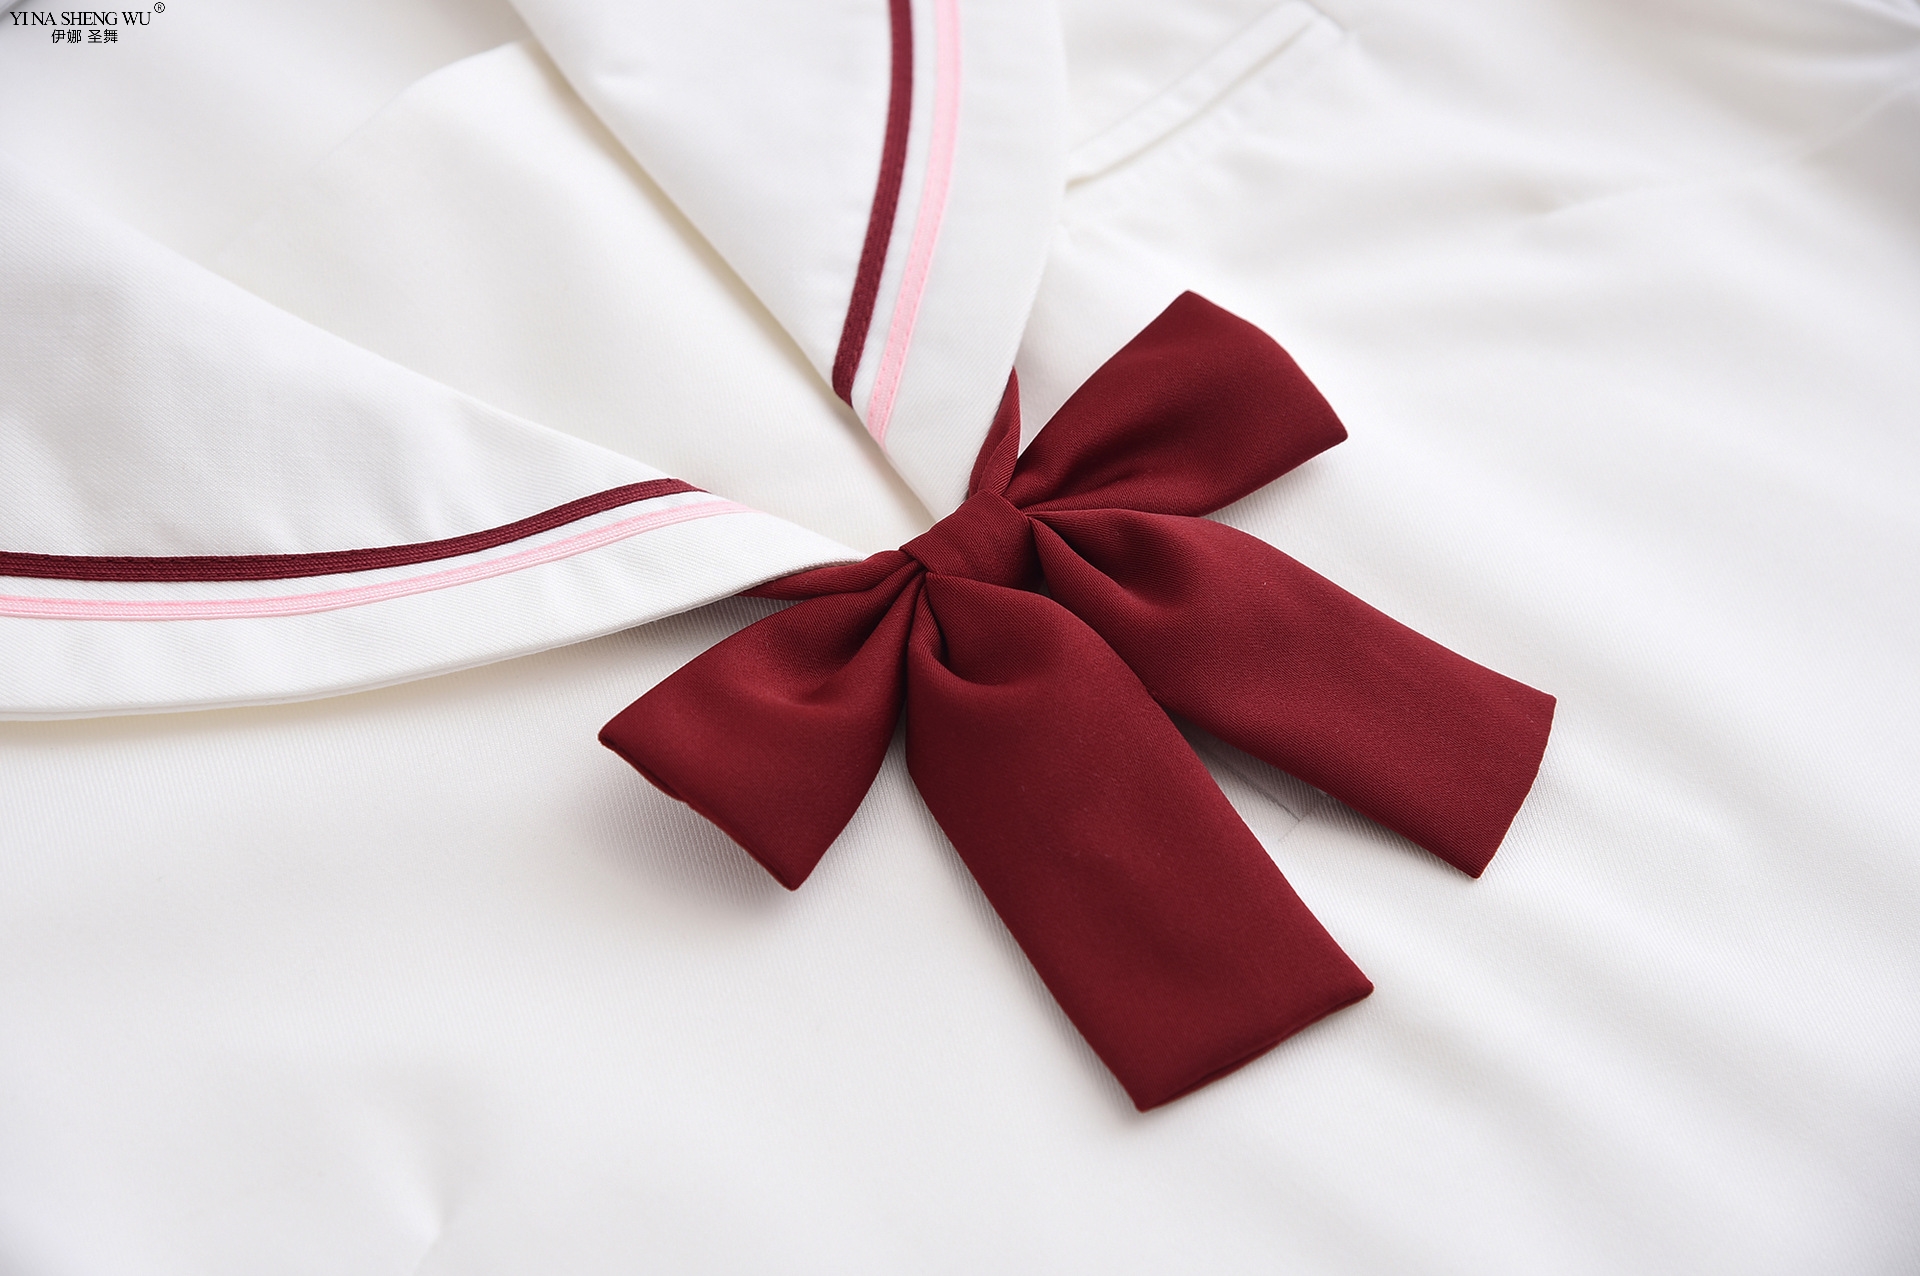 Sailor Suit School Uniform Sets Red Pleated Skirt JK School Uniforms For Girls White Shirt and Red Skirt Suits Student Cosplay